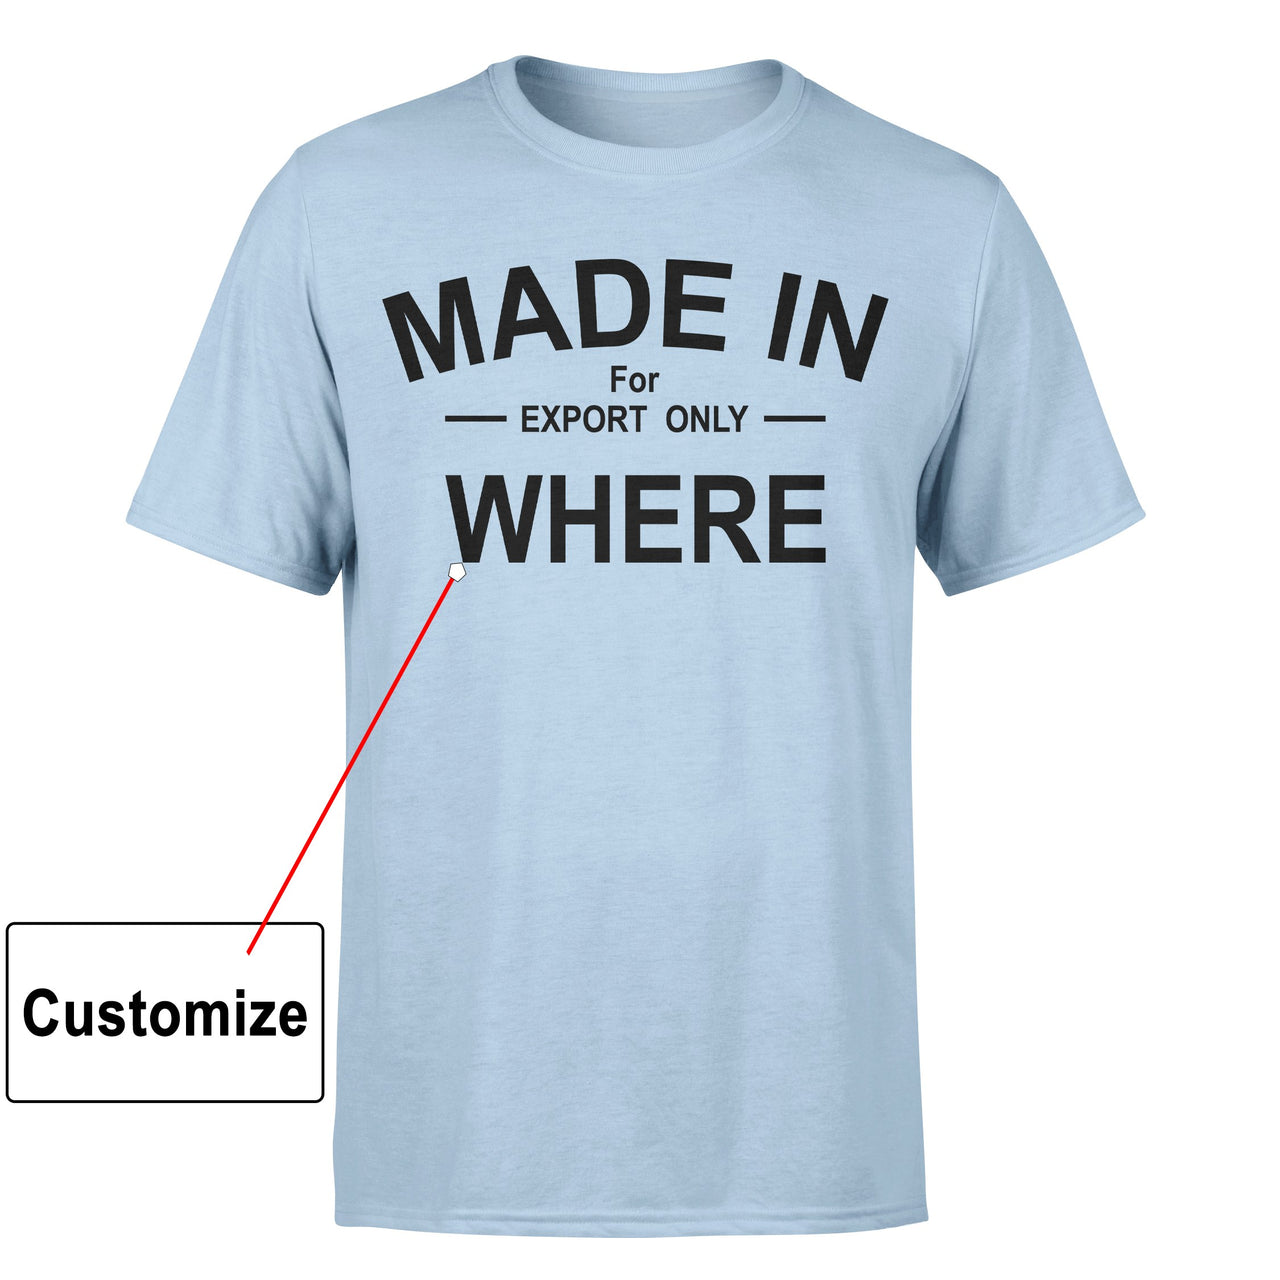 Customizable MADE IN Designed T-Shirts